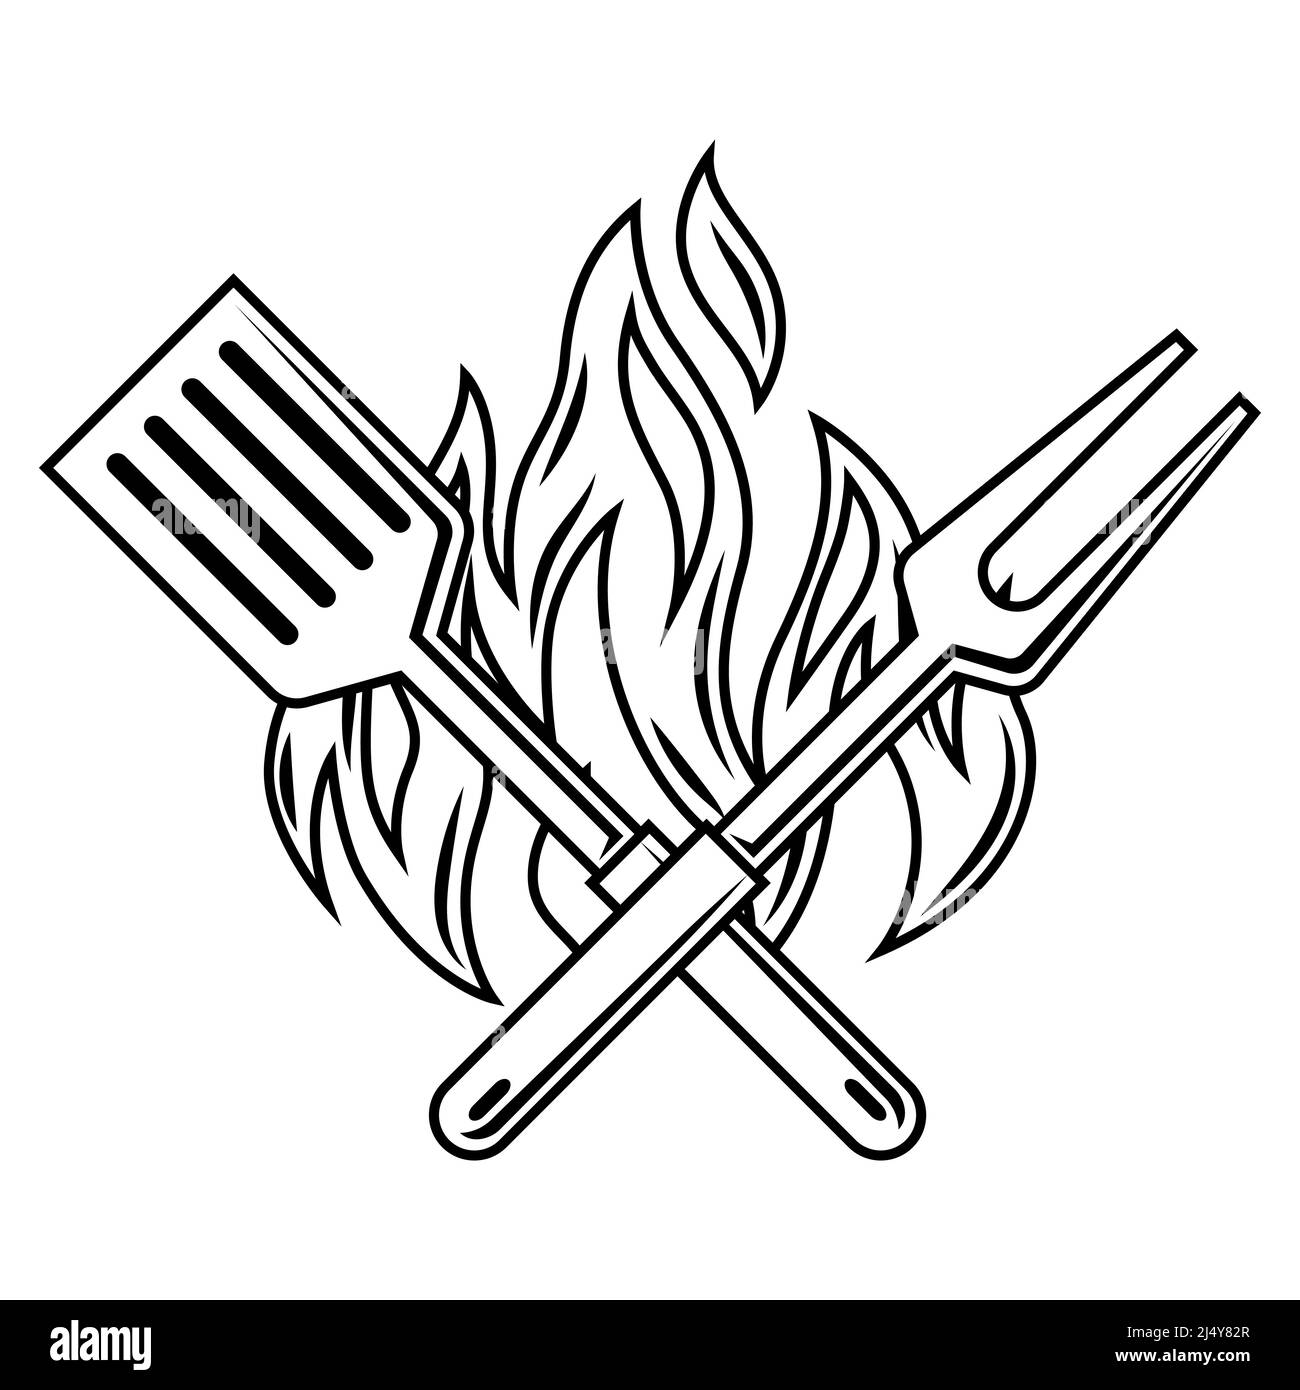 Bbq illustration with fire, spatula and fork. Stylized kitchen and restaurant menu items. Stock Vector